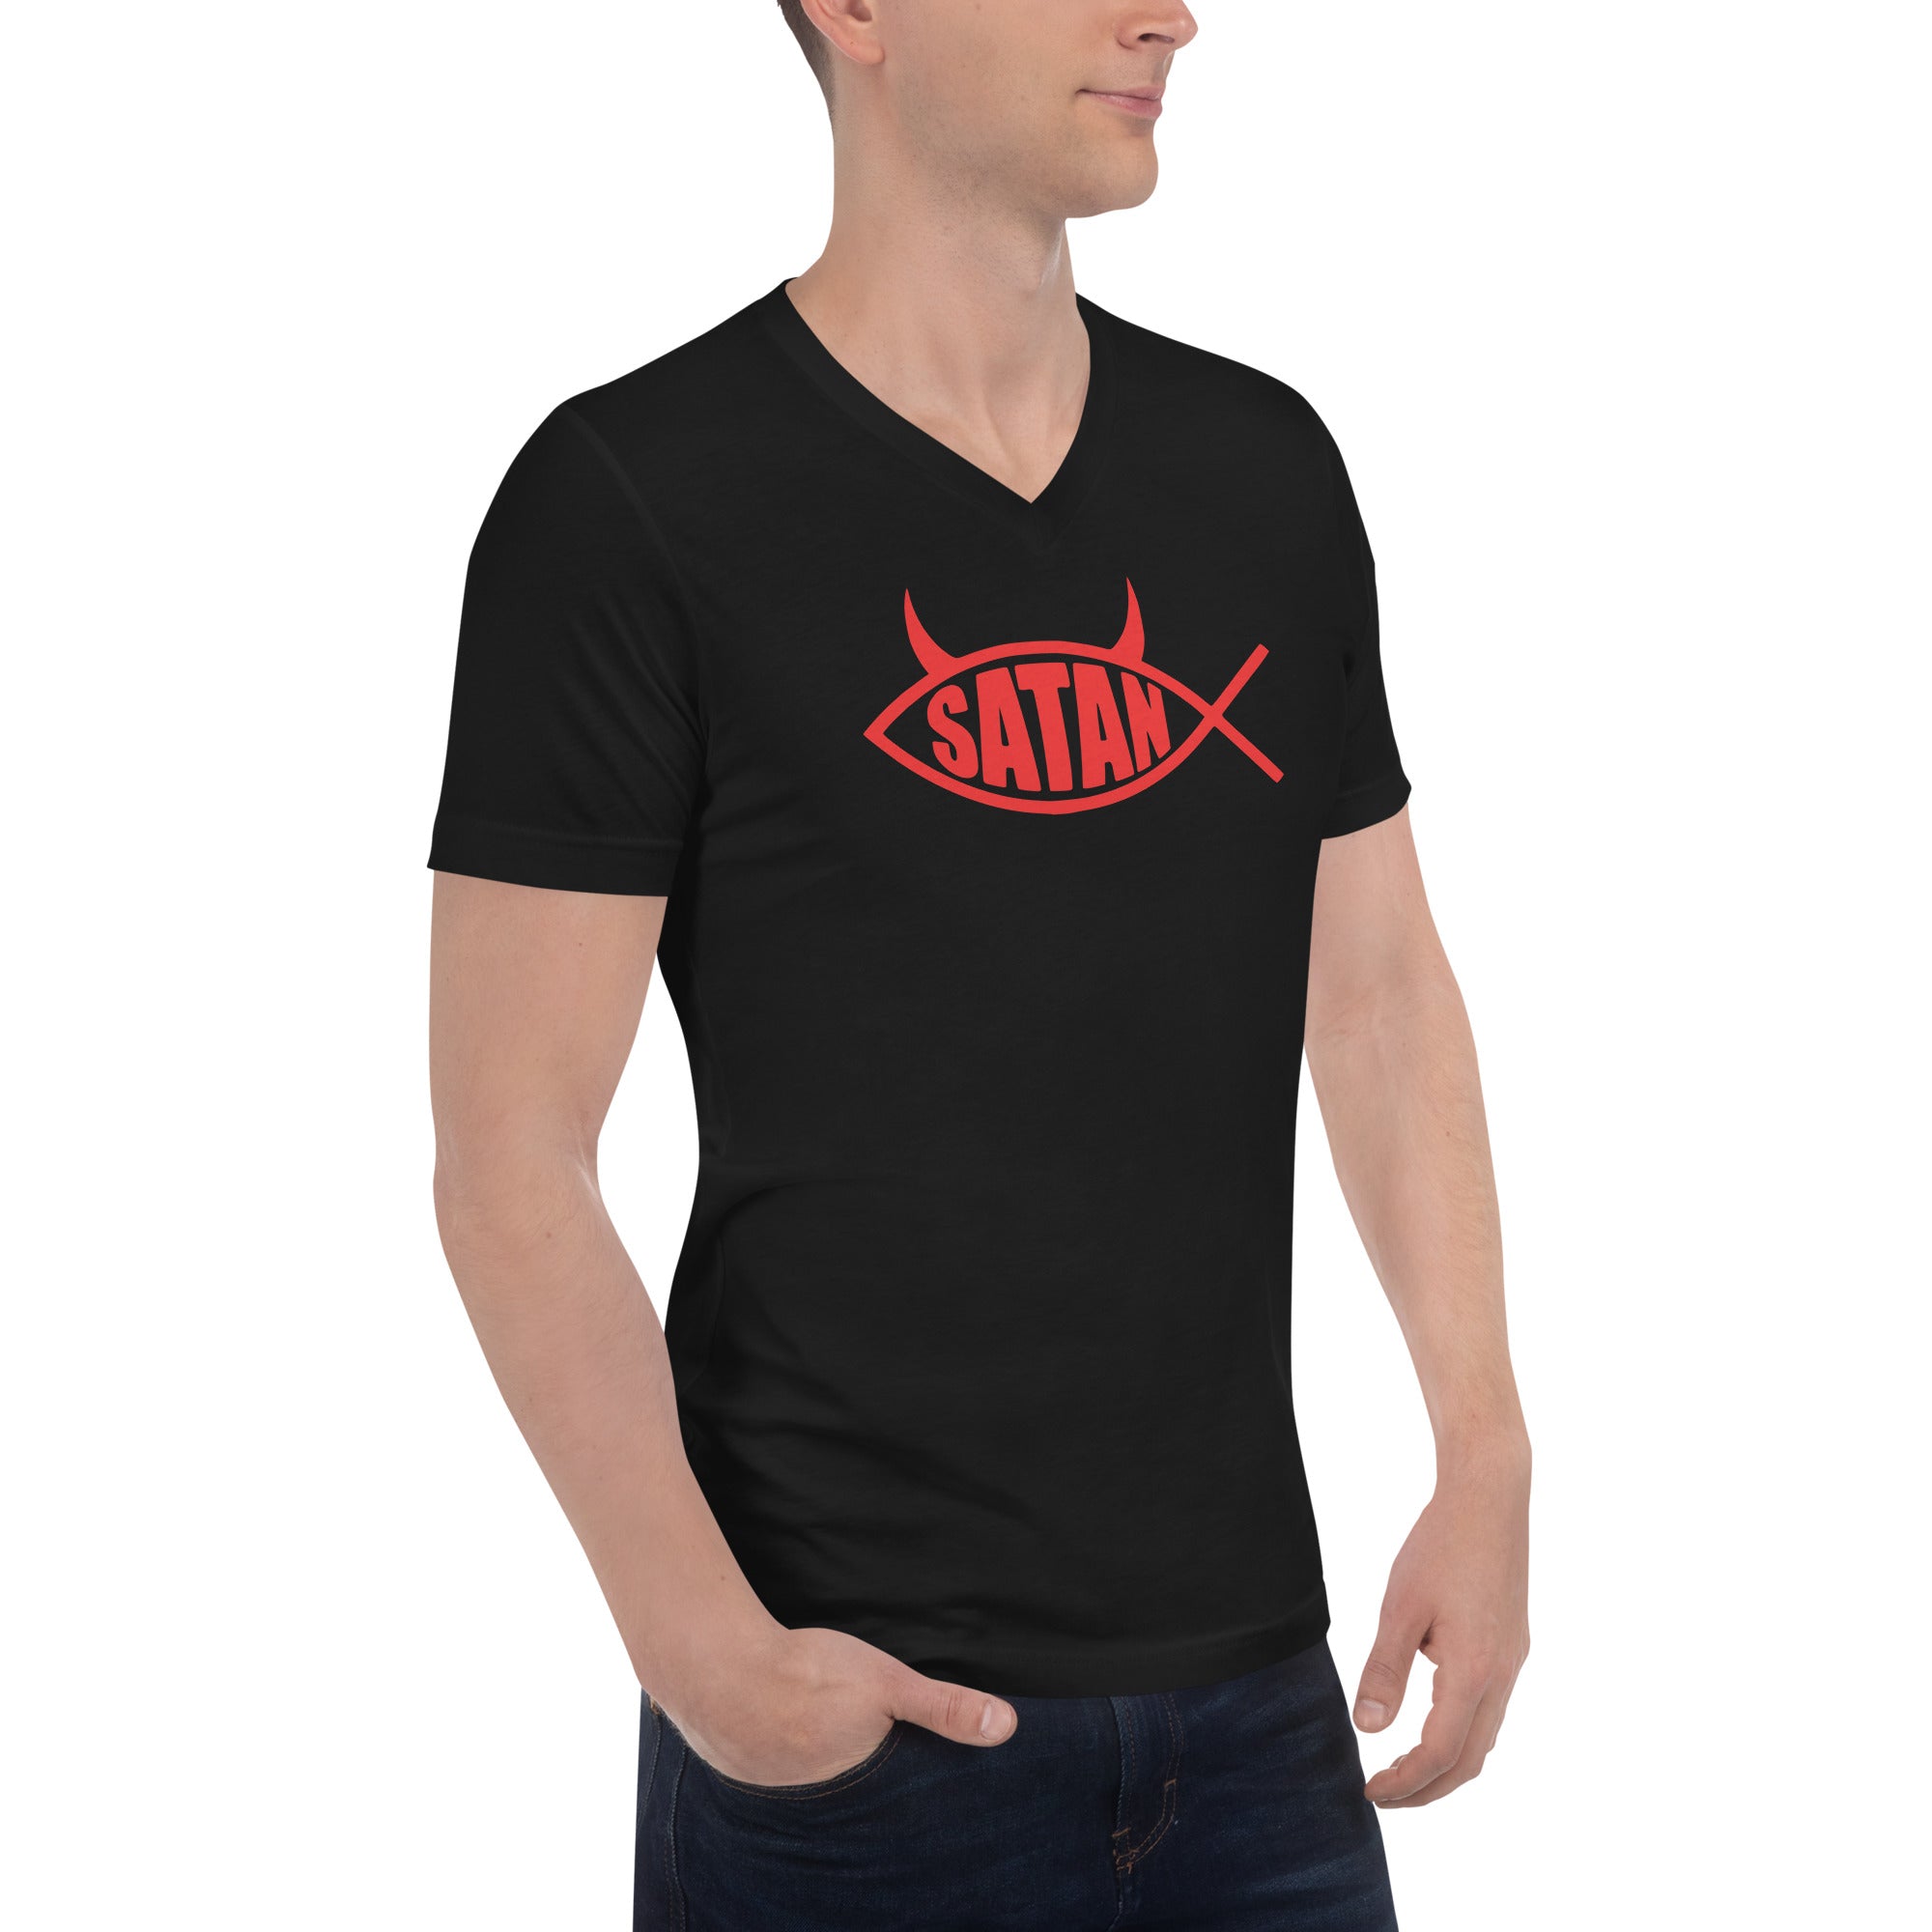 Red Ichthys Satan Fish with Horns Religious Satire Short Sleeve V-Neck T-Shirt